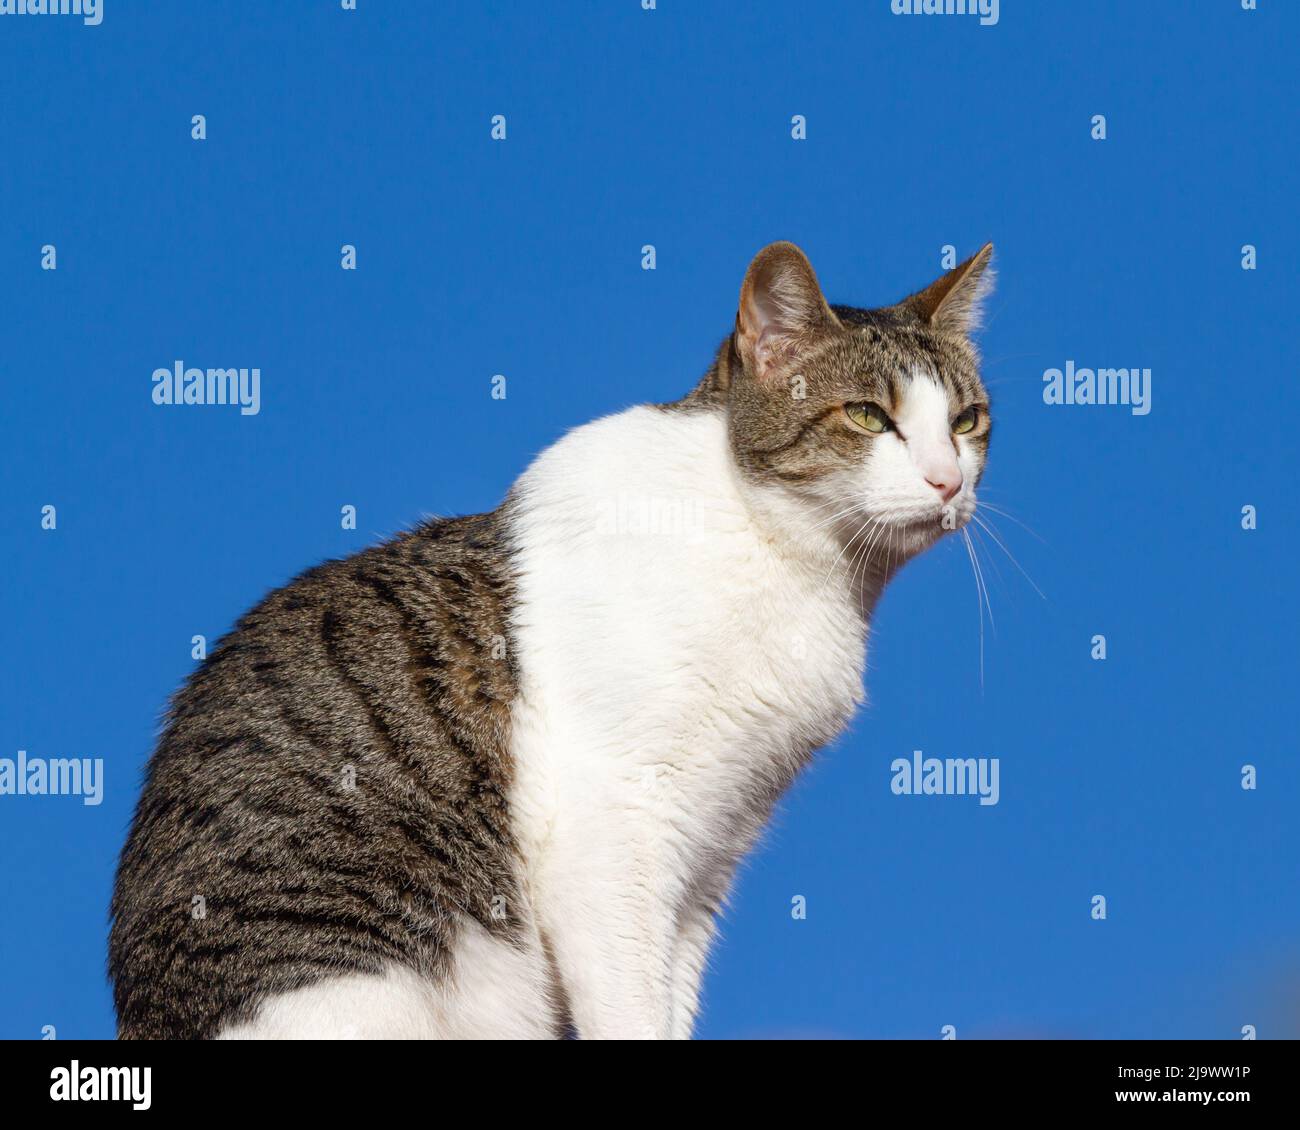 White and brown cat sitting on a roof with a blue background. Stock Photo